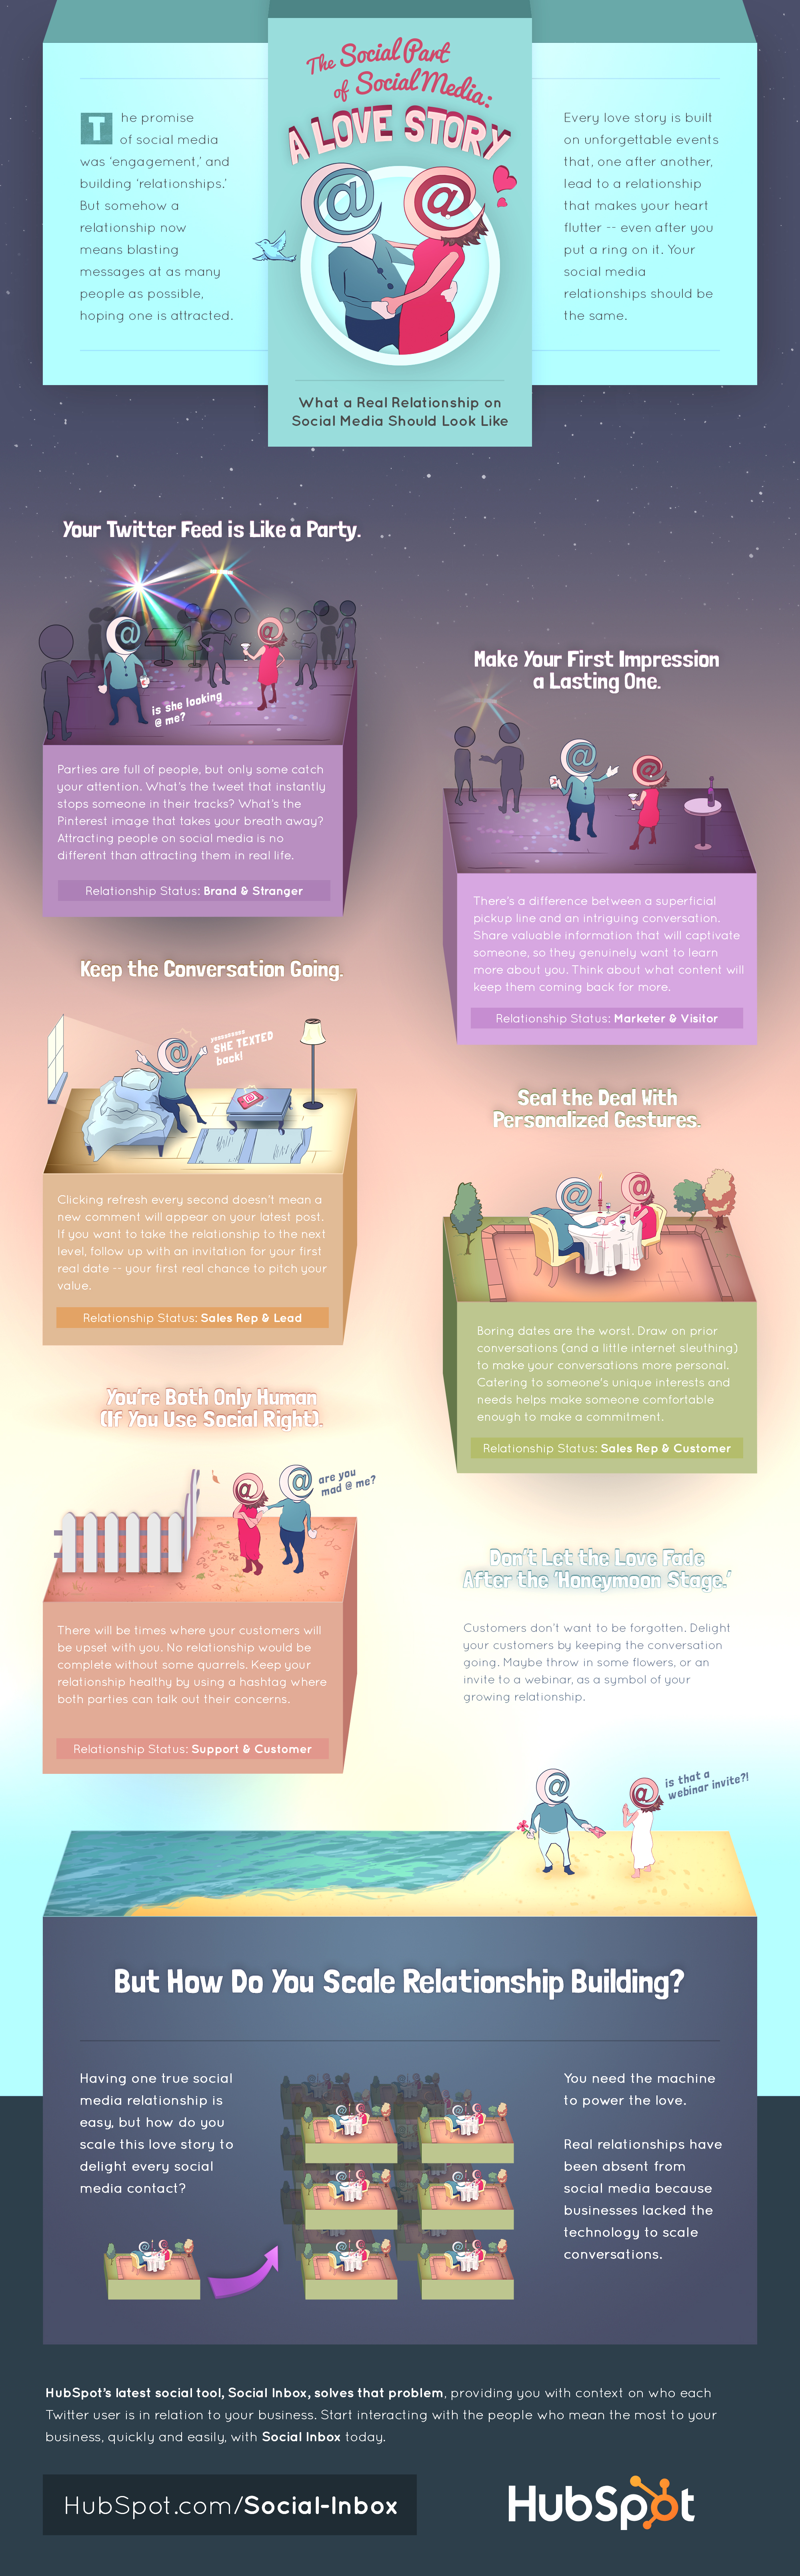 The Social Part of Social Media: A Love Story [INFOGRAPHIC]  /></a><div style=